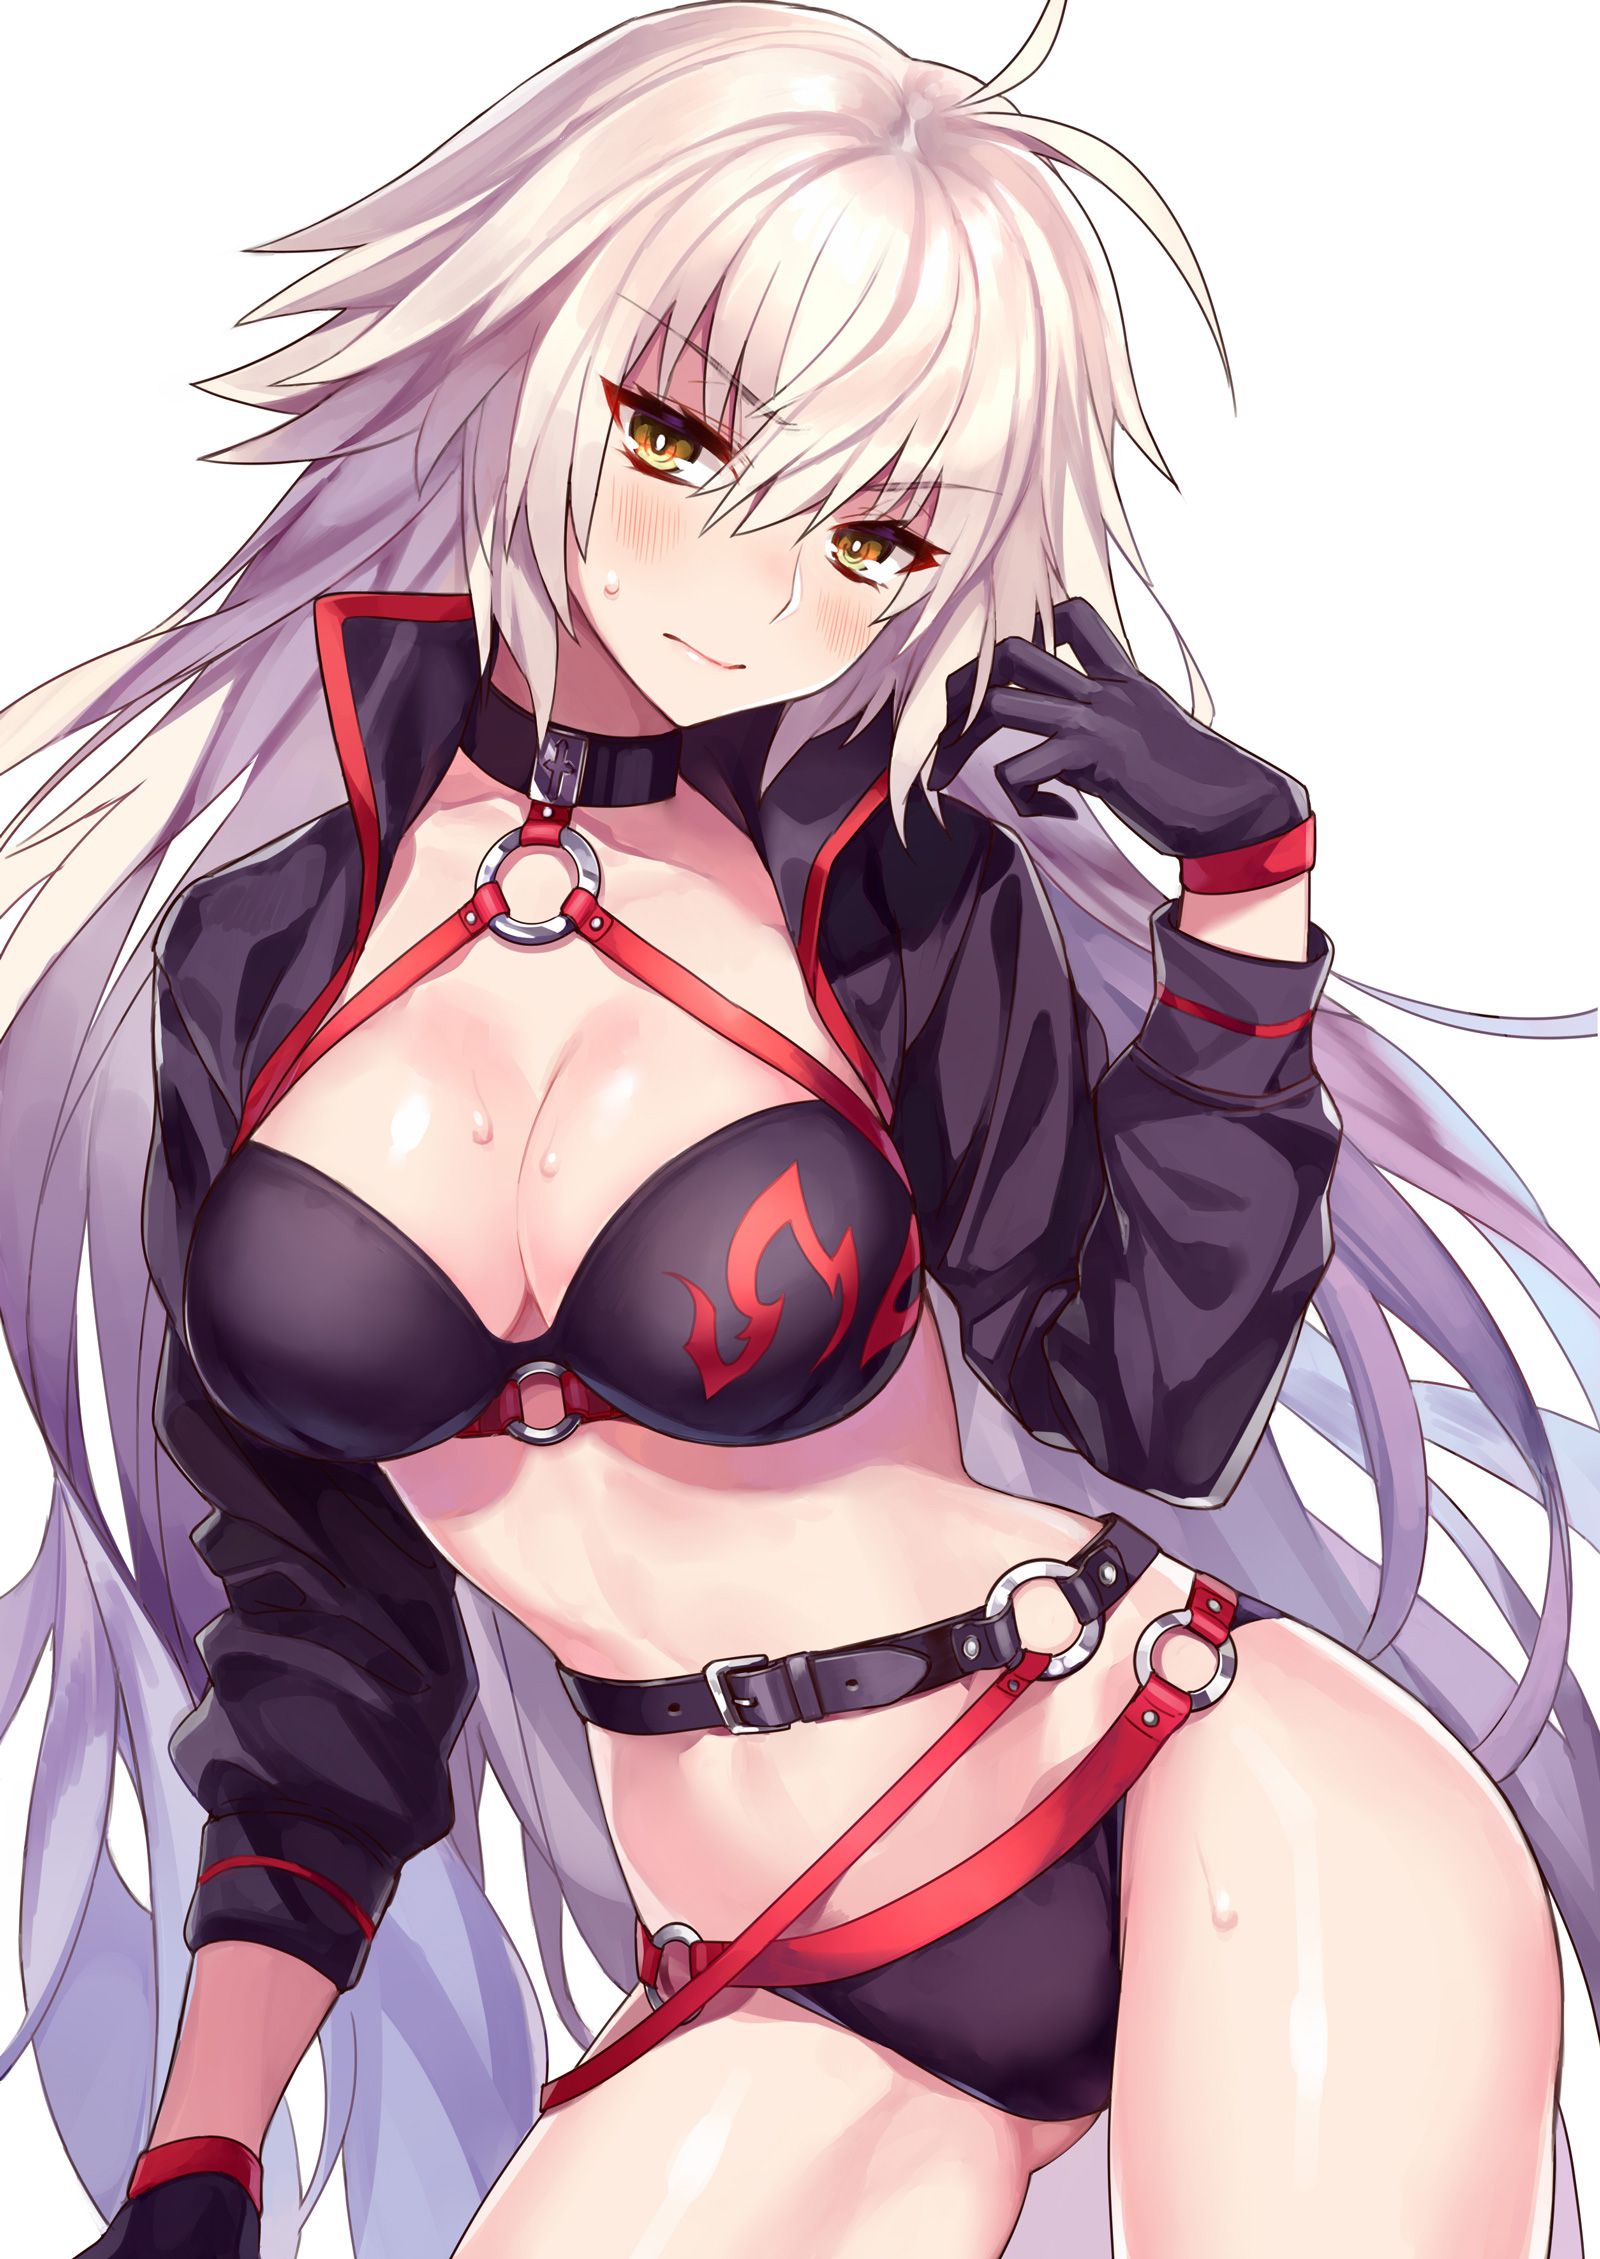 Secondary image of a silver-haired girl that 4 50 photos [Ero/non-erotic] 35